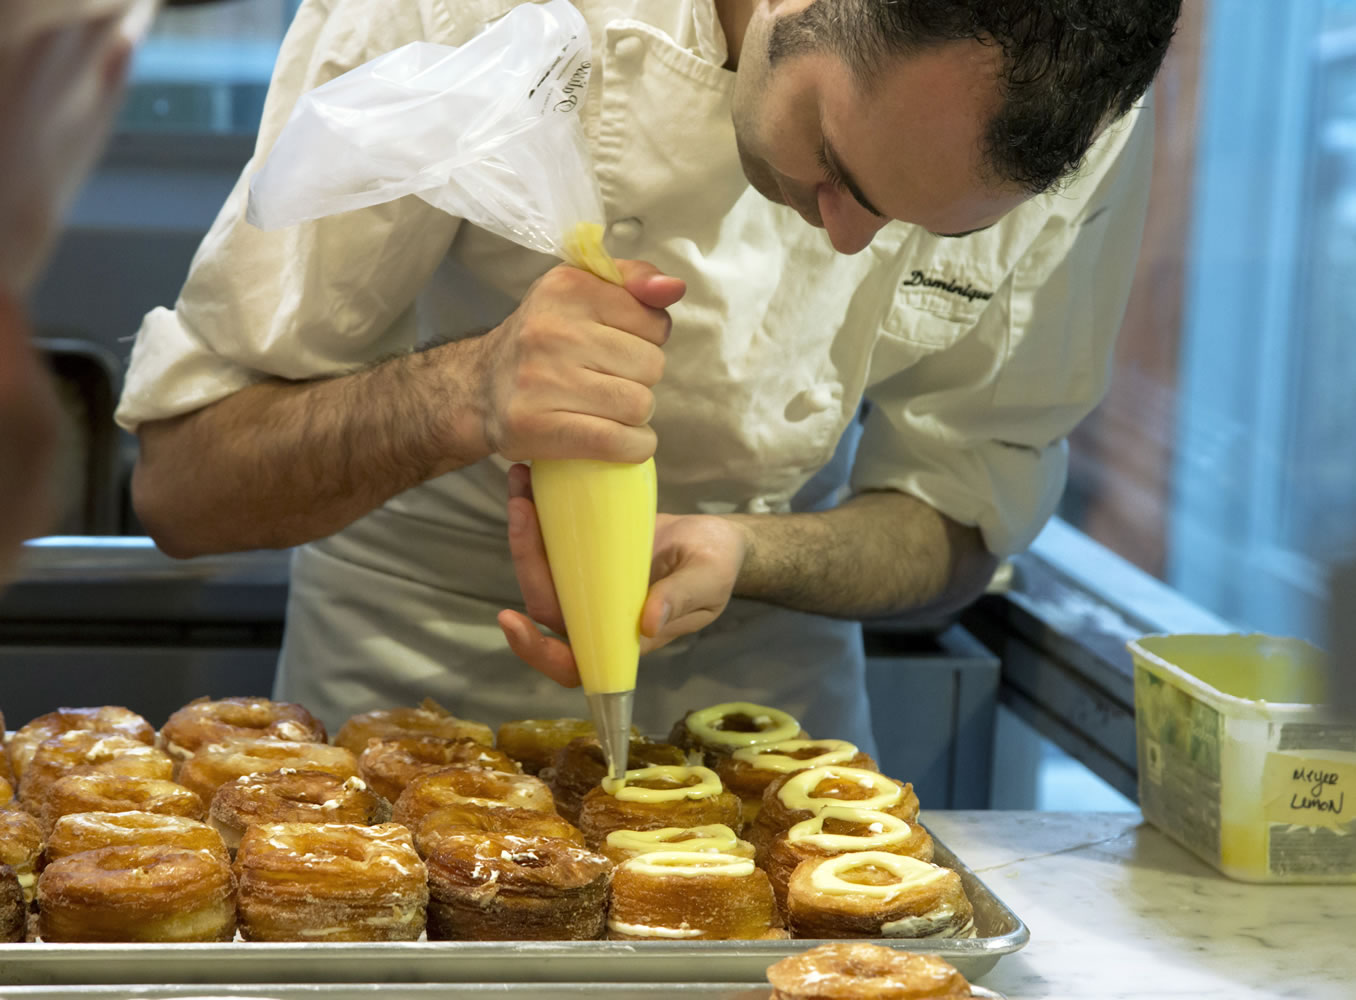 Chef Dominique Ansel makes Cronuts, a croissant-doughnut hybrid, at the Dominique Ansel Bakery in New York.